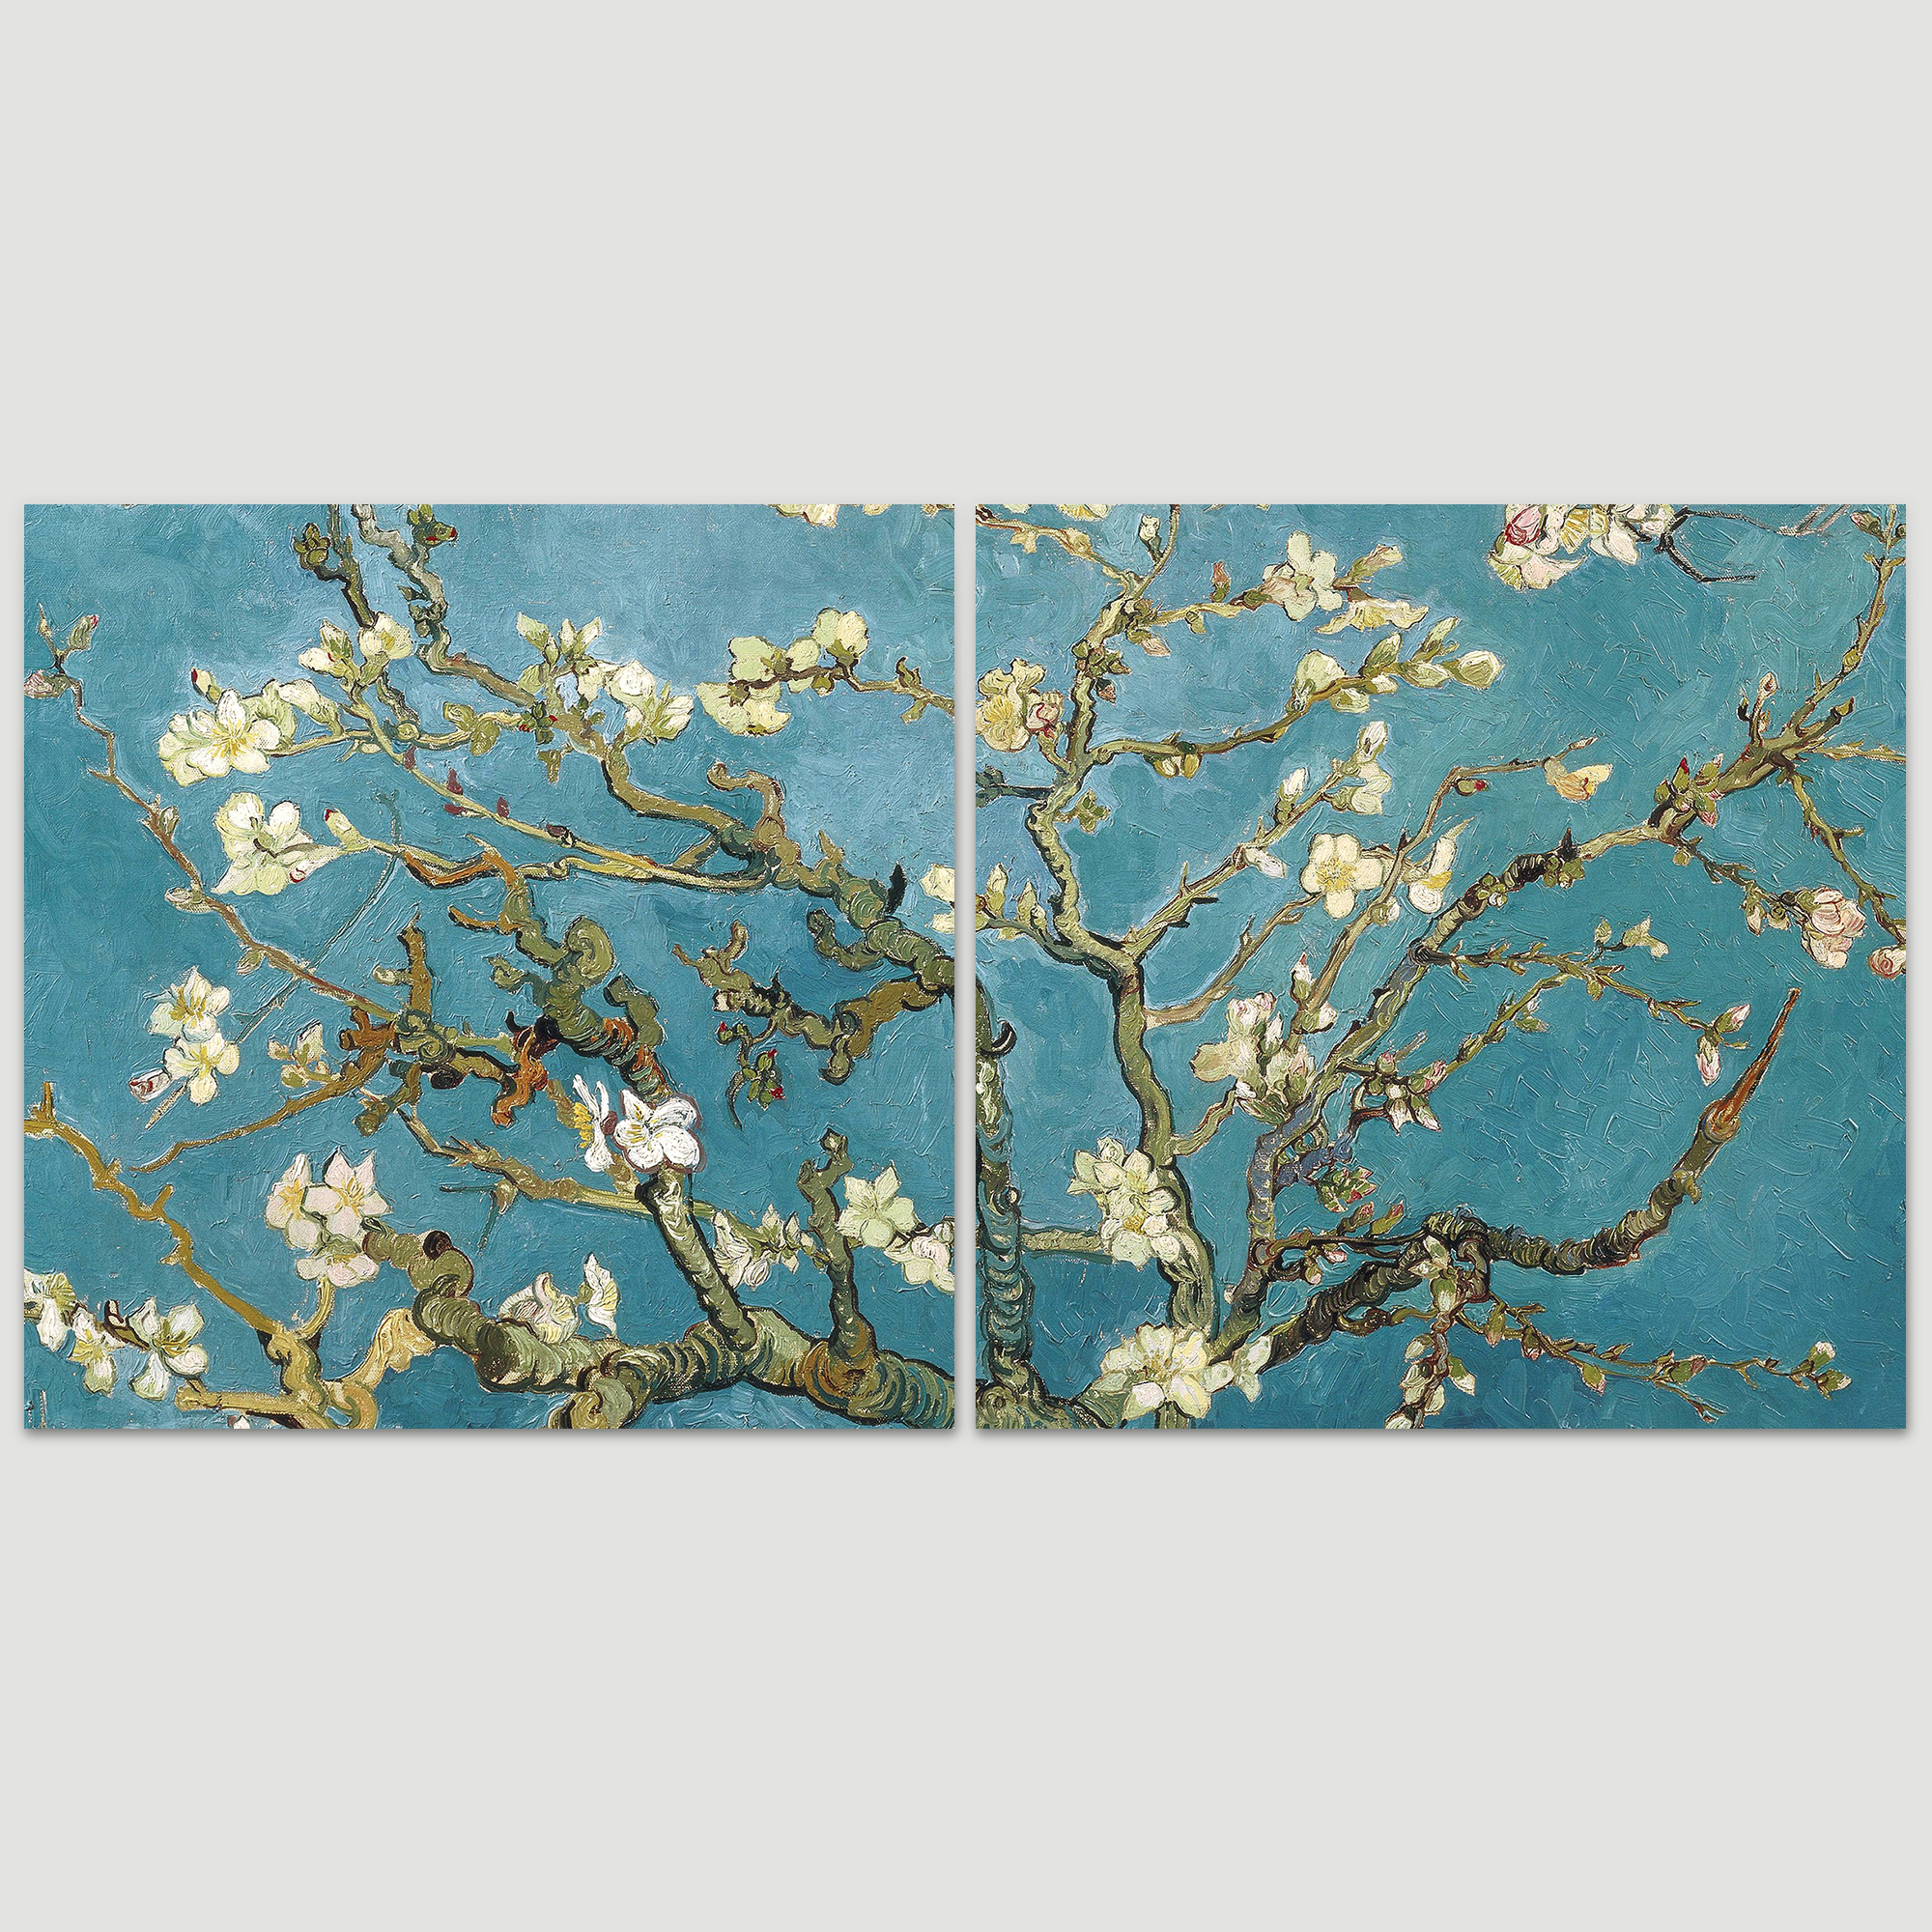 2 Panel Square Canvas Wall Art - Almond Blossom by Vincent Van Gogh - Giclee Print Gallery Wrap Modern Home Art Ready to Hang - 16